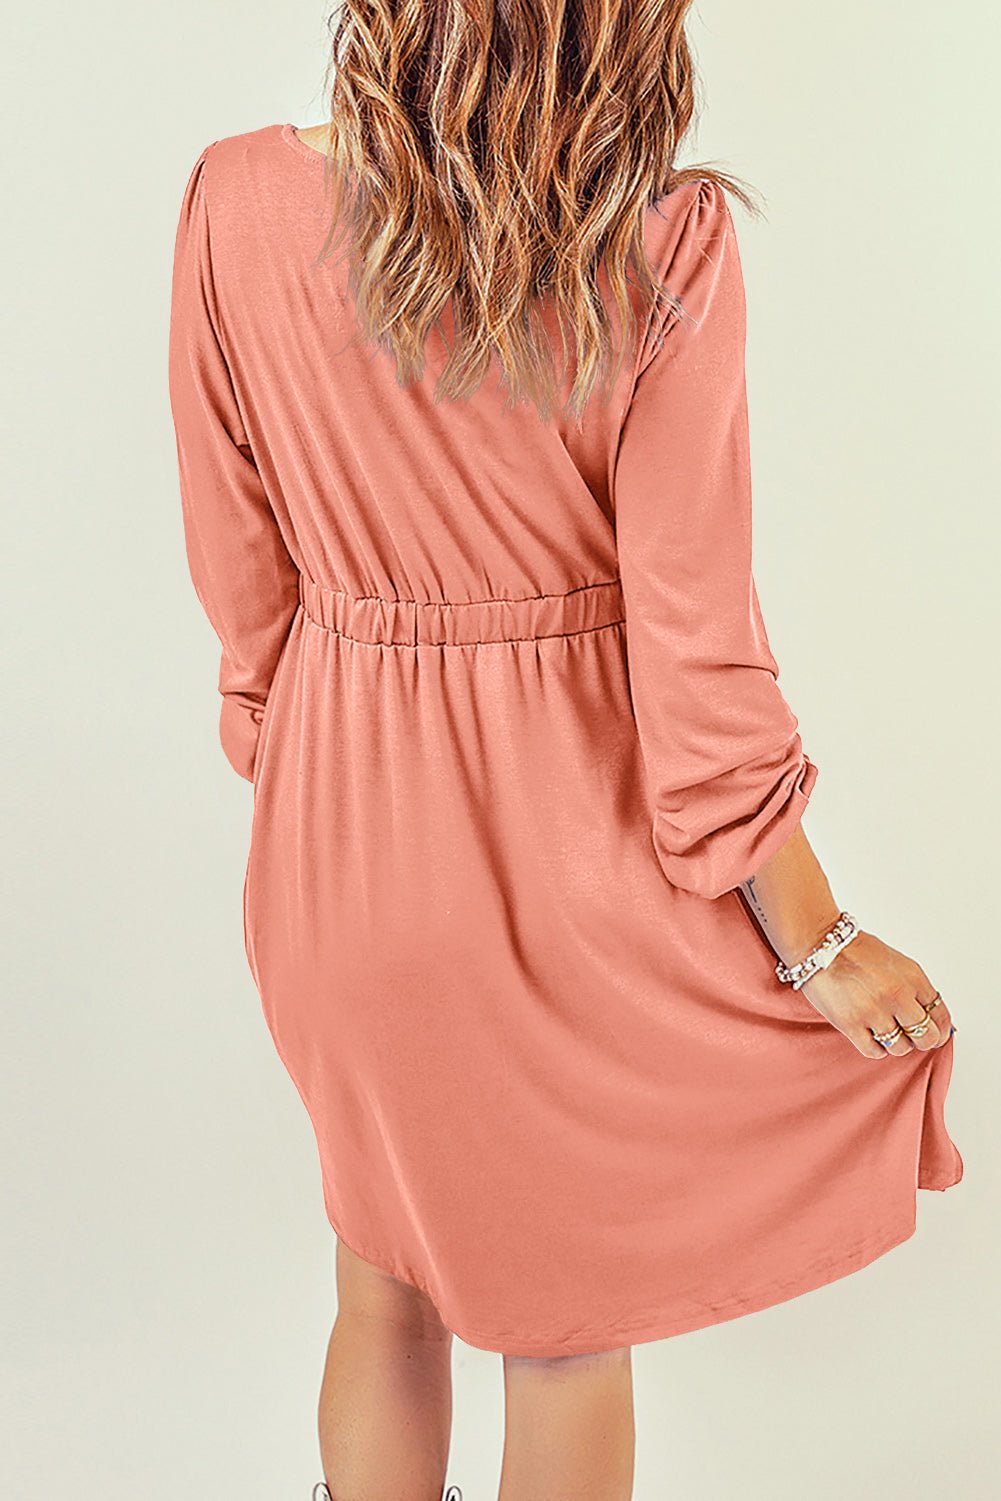 Button Down Long Sleeve Dress with Pockets - Bakers Shoes store